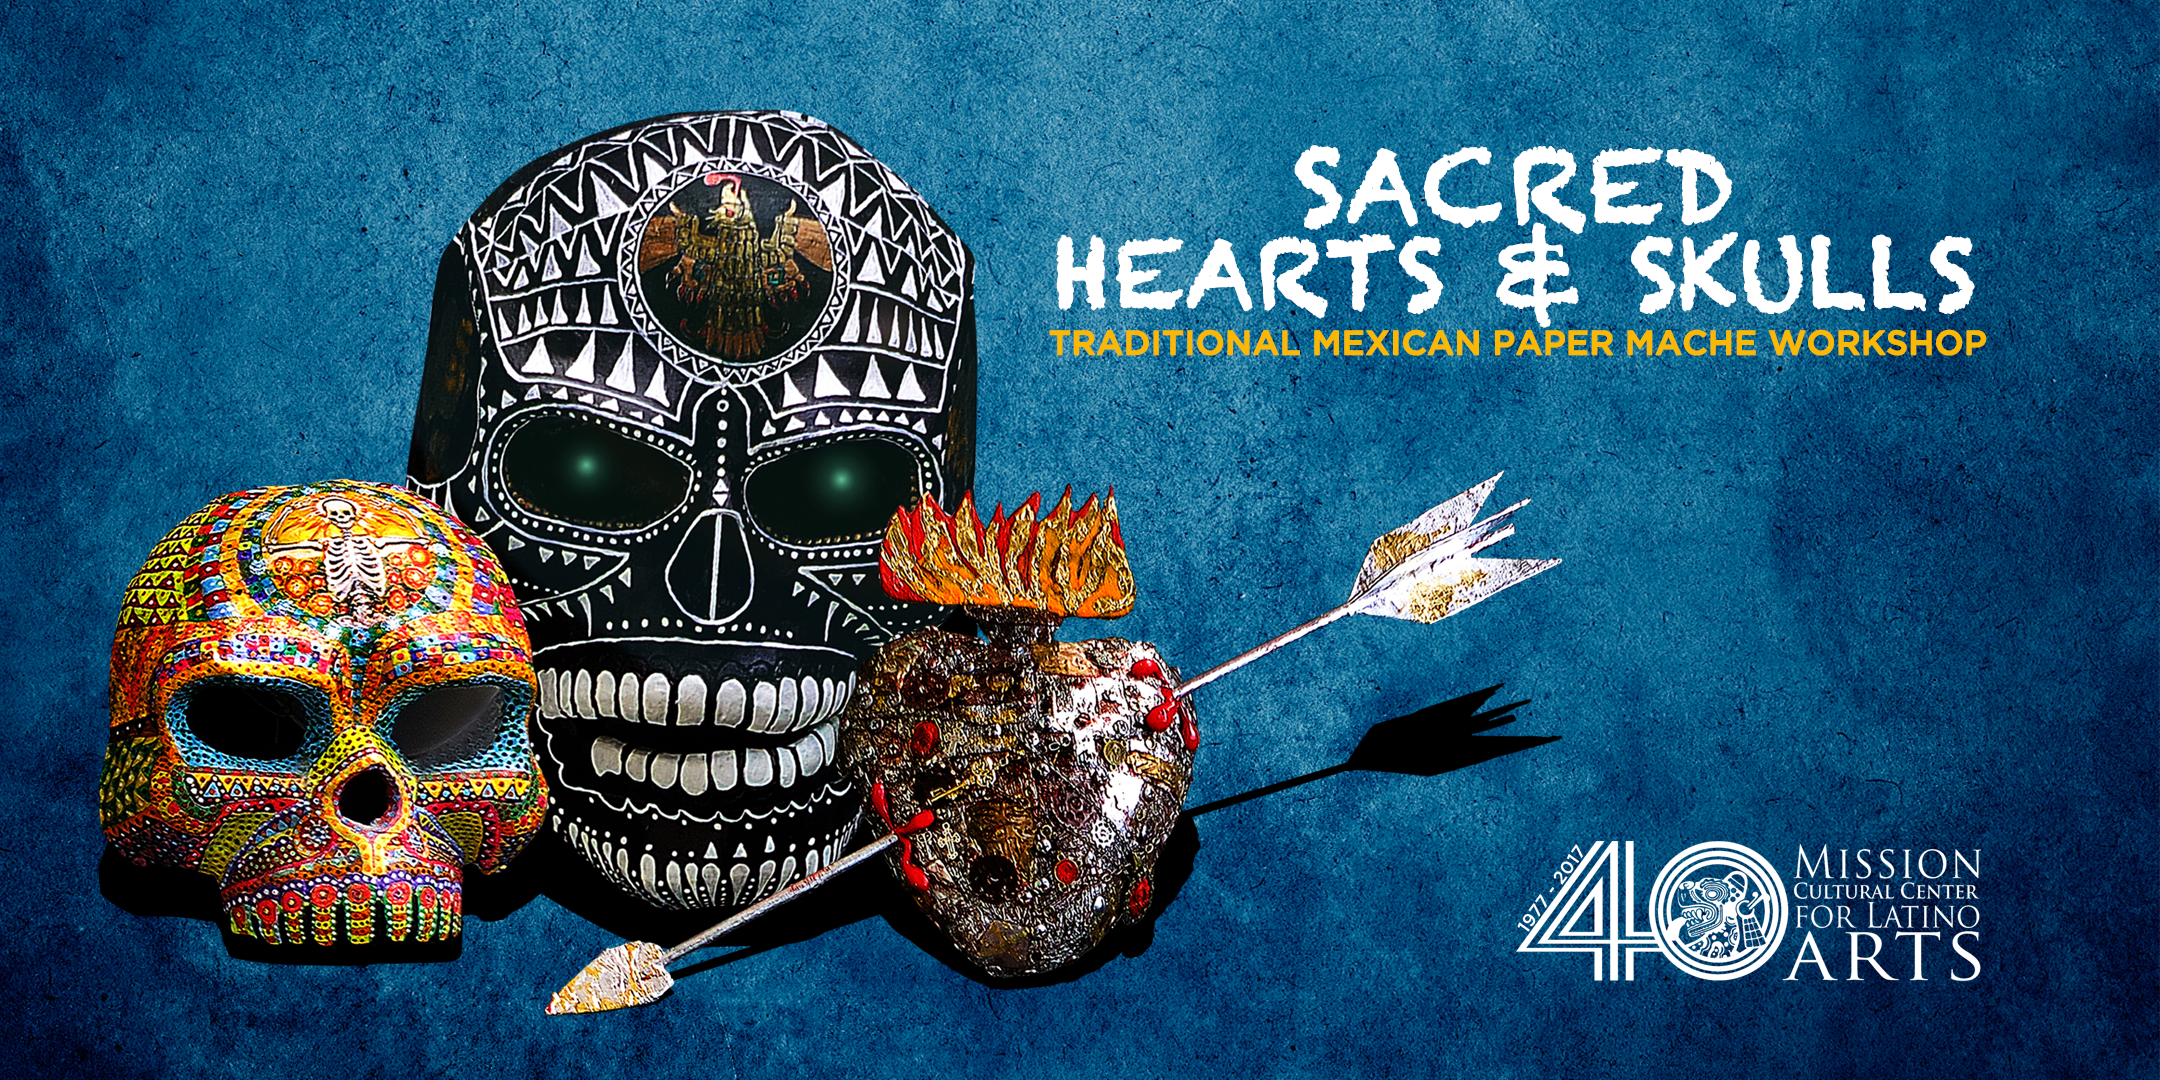 SACRED HEARTS & SKULLS | Traditional Mexican Paper Mache Workshop